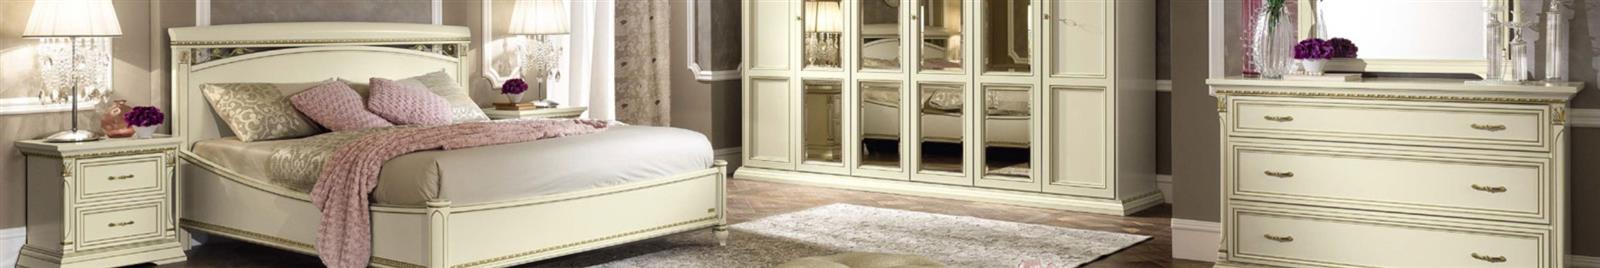 Treviso Night White Ash - Camel Night Collection